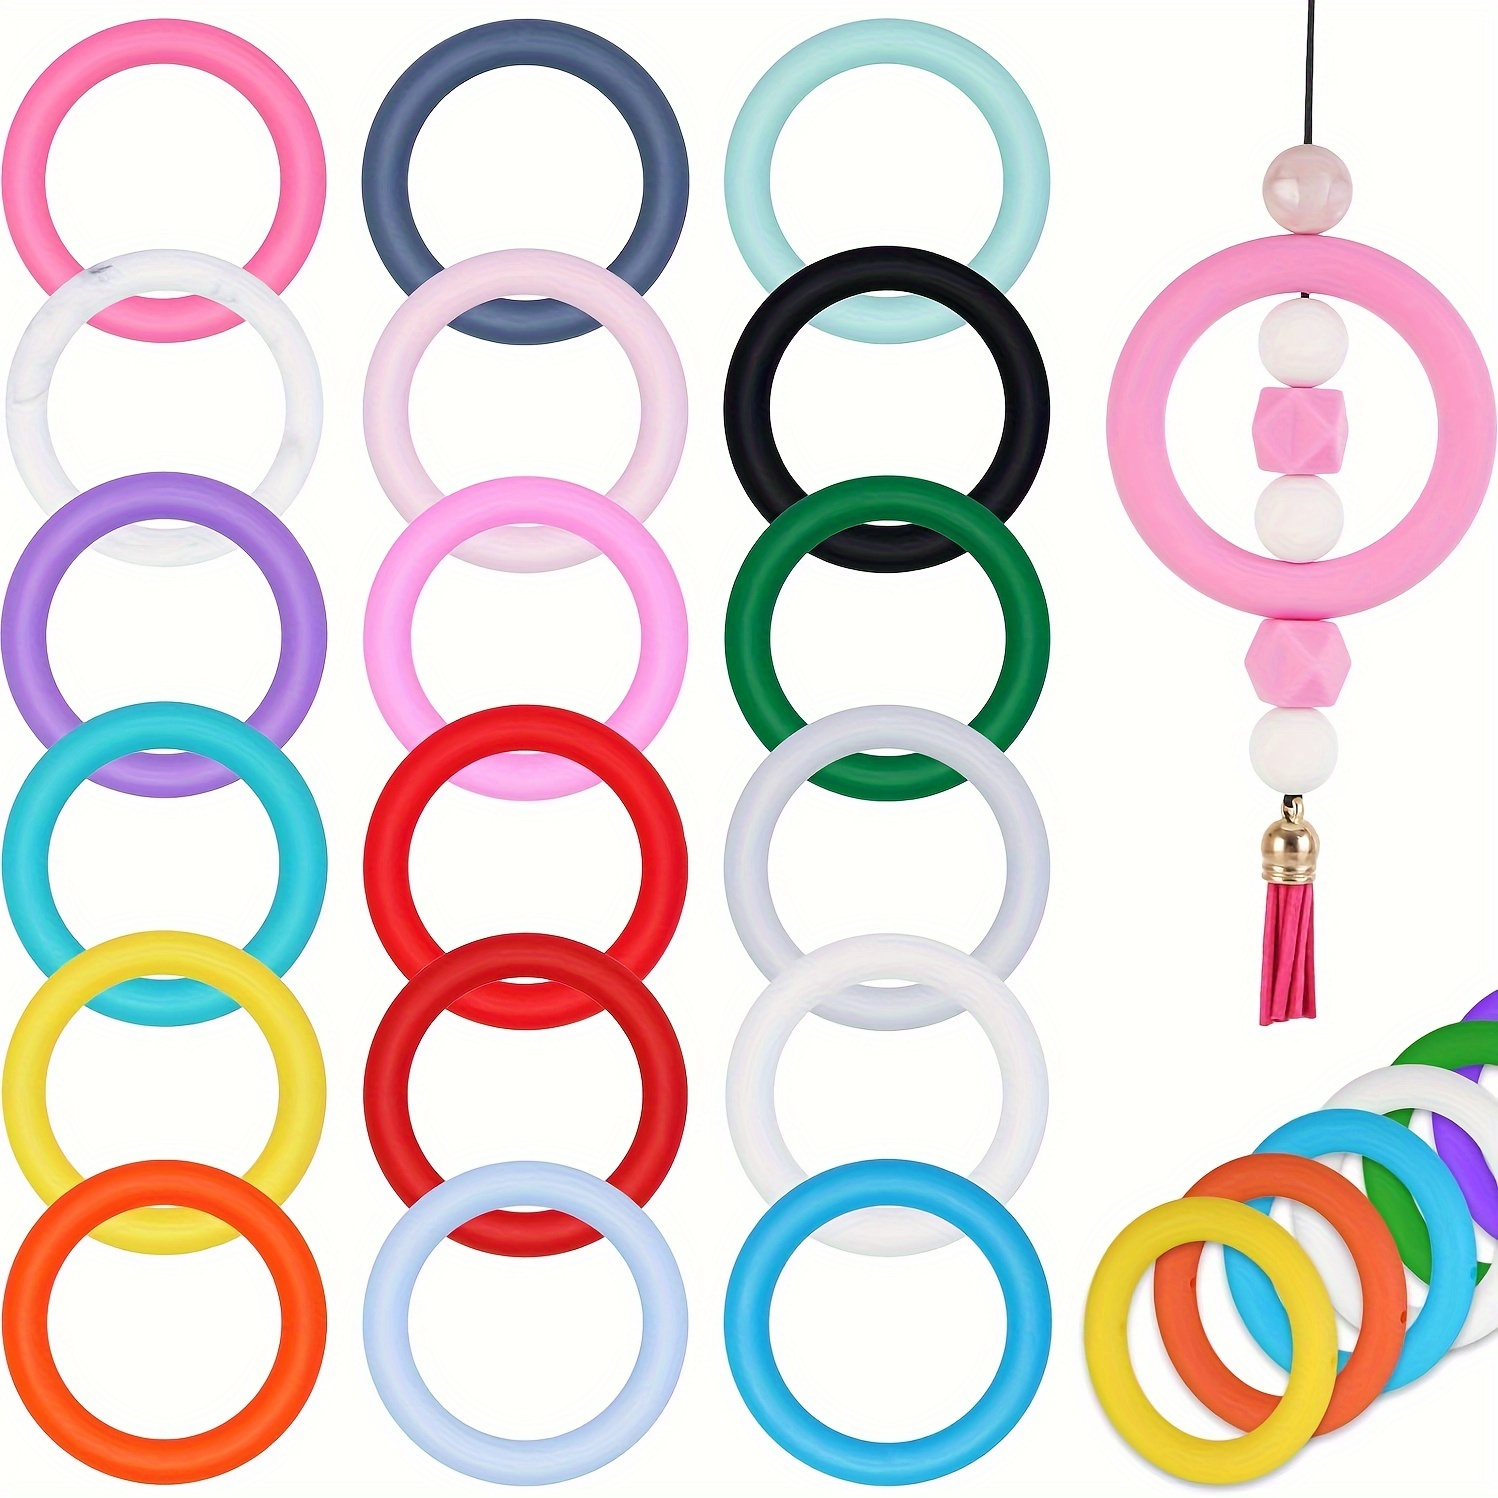 

18pcs Color Silicone O-shape Ring Bulk Beads, Hollow Silicon Ring Beads To Make Key Chain Beads Lanyard Non-separate Necklace Pendant For Bracelet Necklace Connecting Silicone Ring Accessories